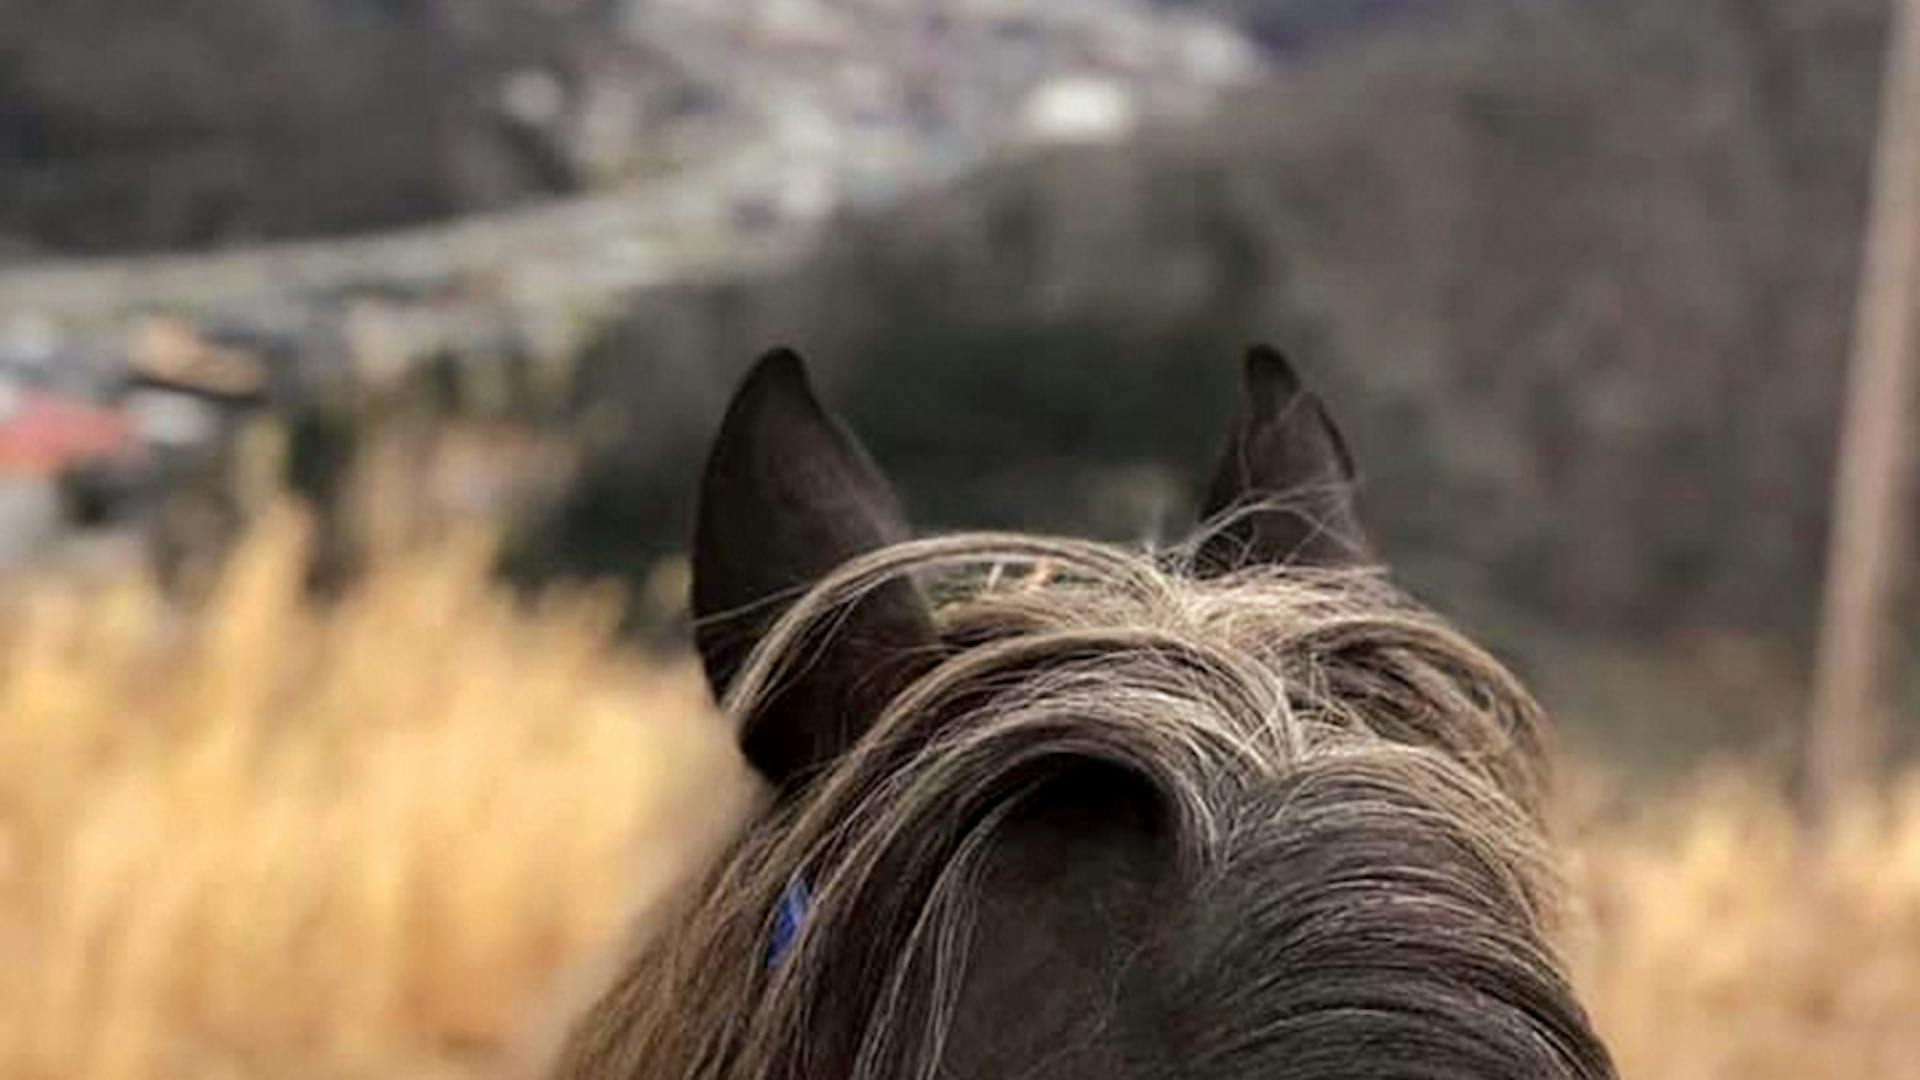 View from the Muddy Boots Horseback Tour in Pikeville, Kentucky (photo courtesy of Tour Pike County)